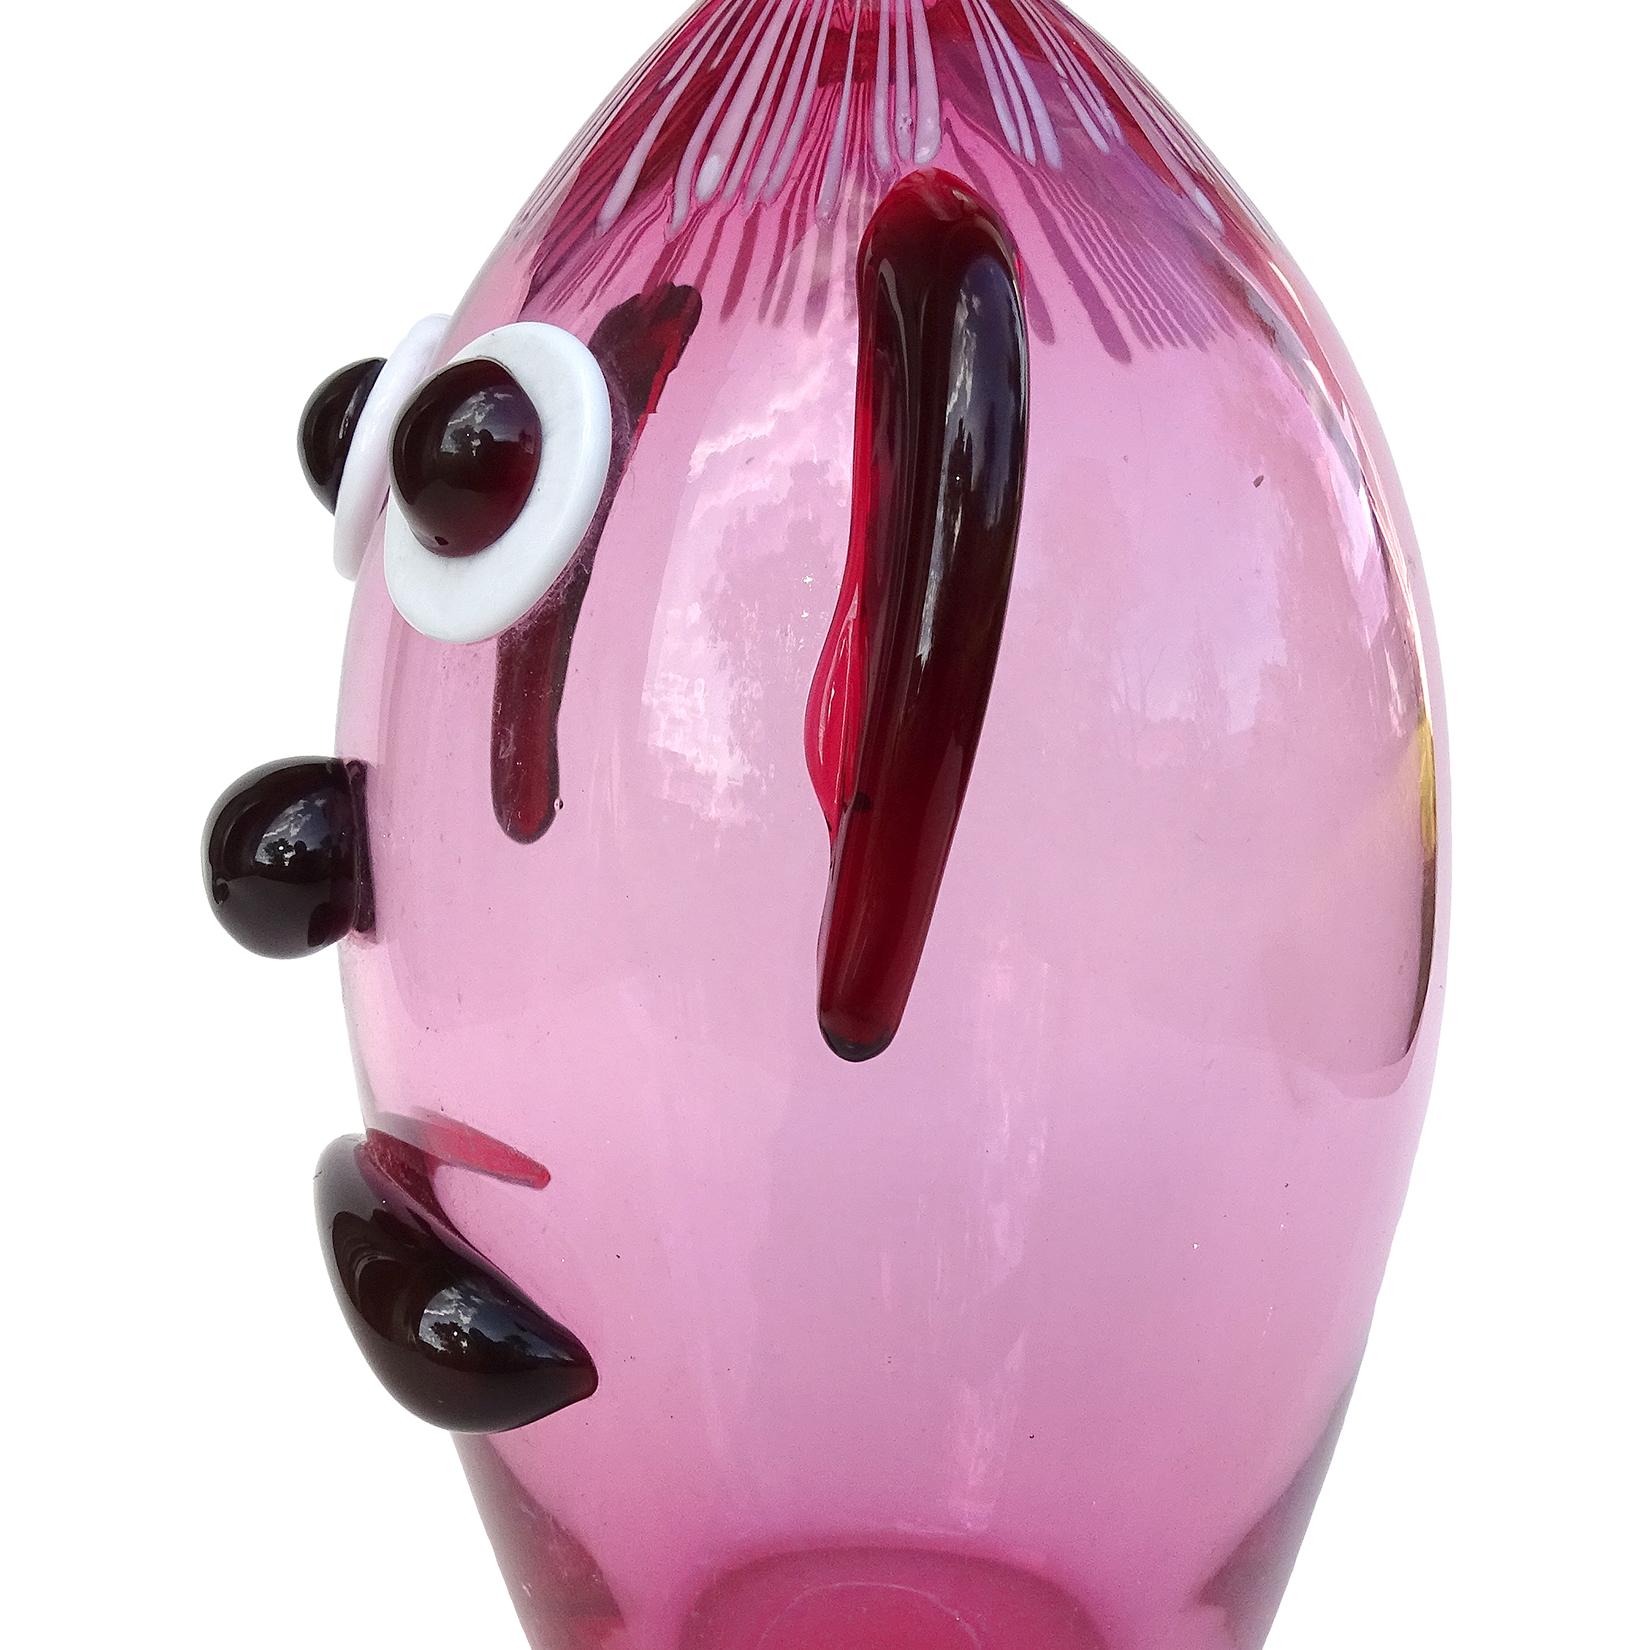 Cute and rare, vintage Murano hand blown Italian art glass clown face bottle / vase in pink, with red accents. Documented to the Fratelli Toso Company. The piece has applied ears, big eyes, a frown and threads of light pink glass for the hair. Would